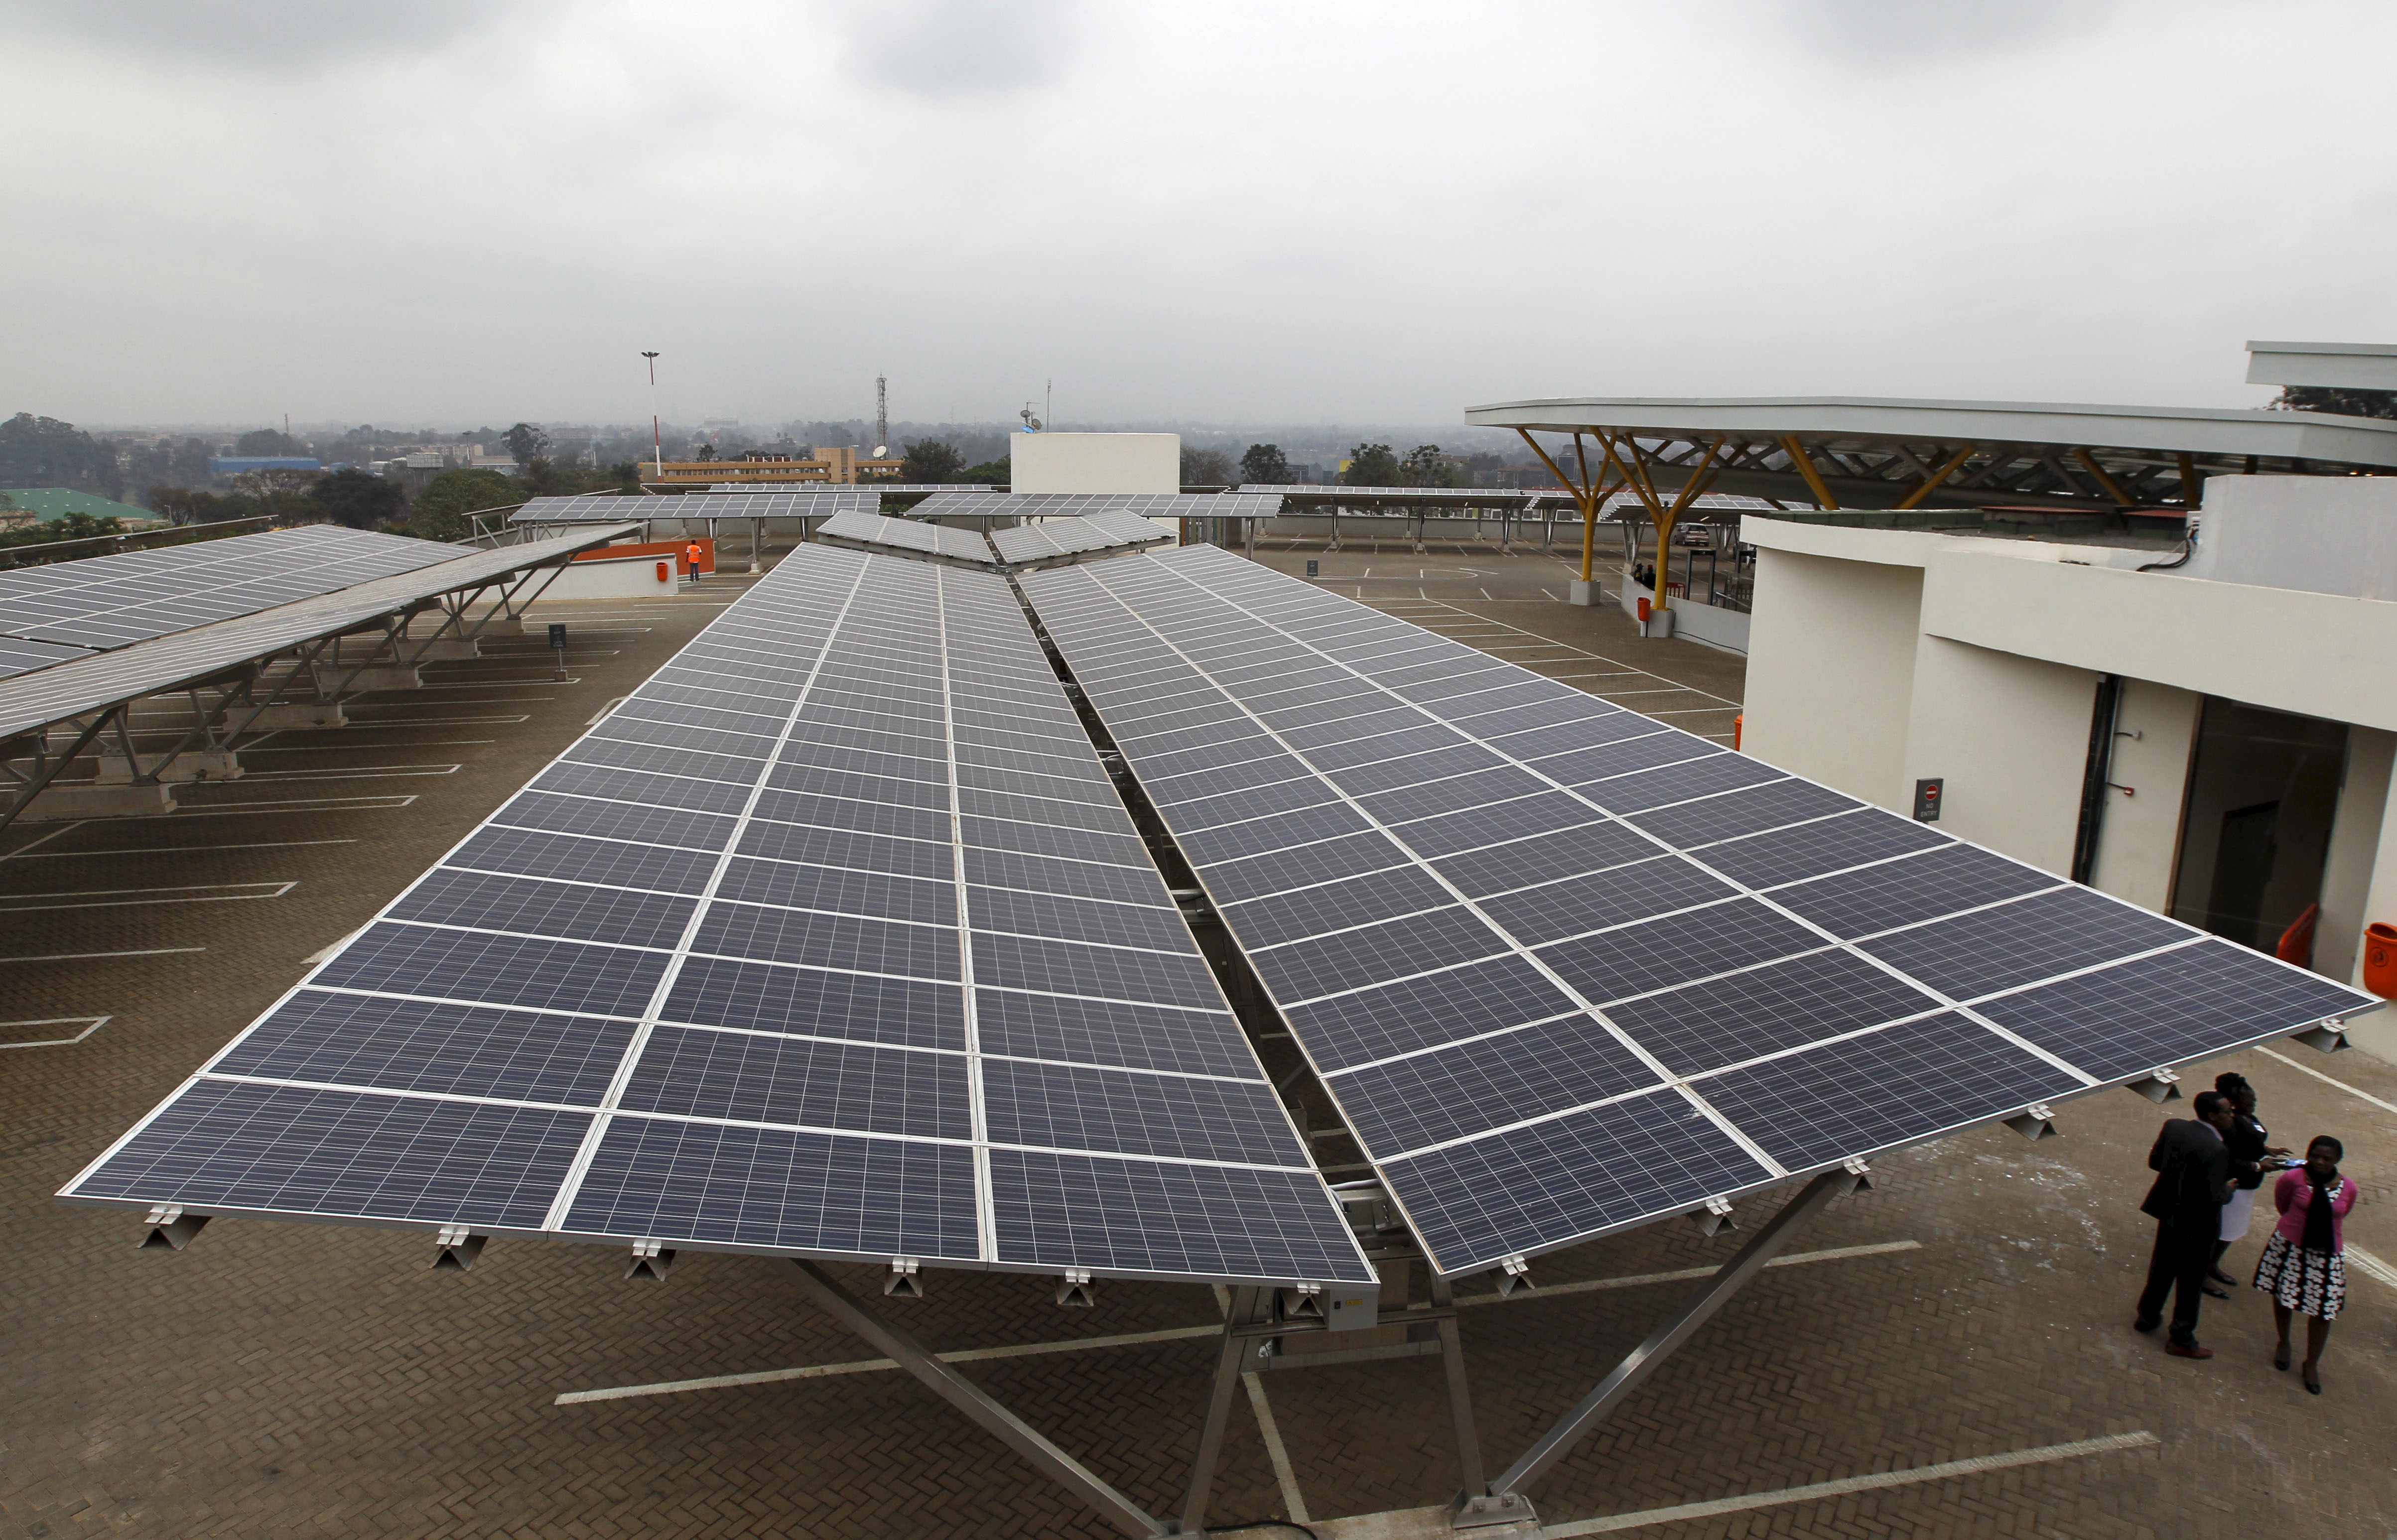 Solar panels are pictured at a solar carport at the Garden City shopping mall in Kenya's capital Nairobi